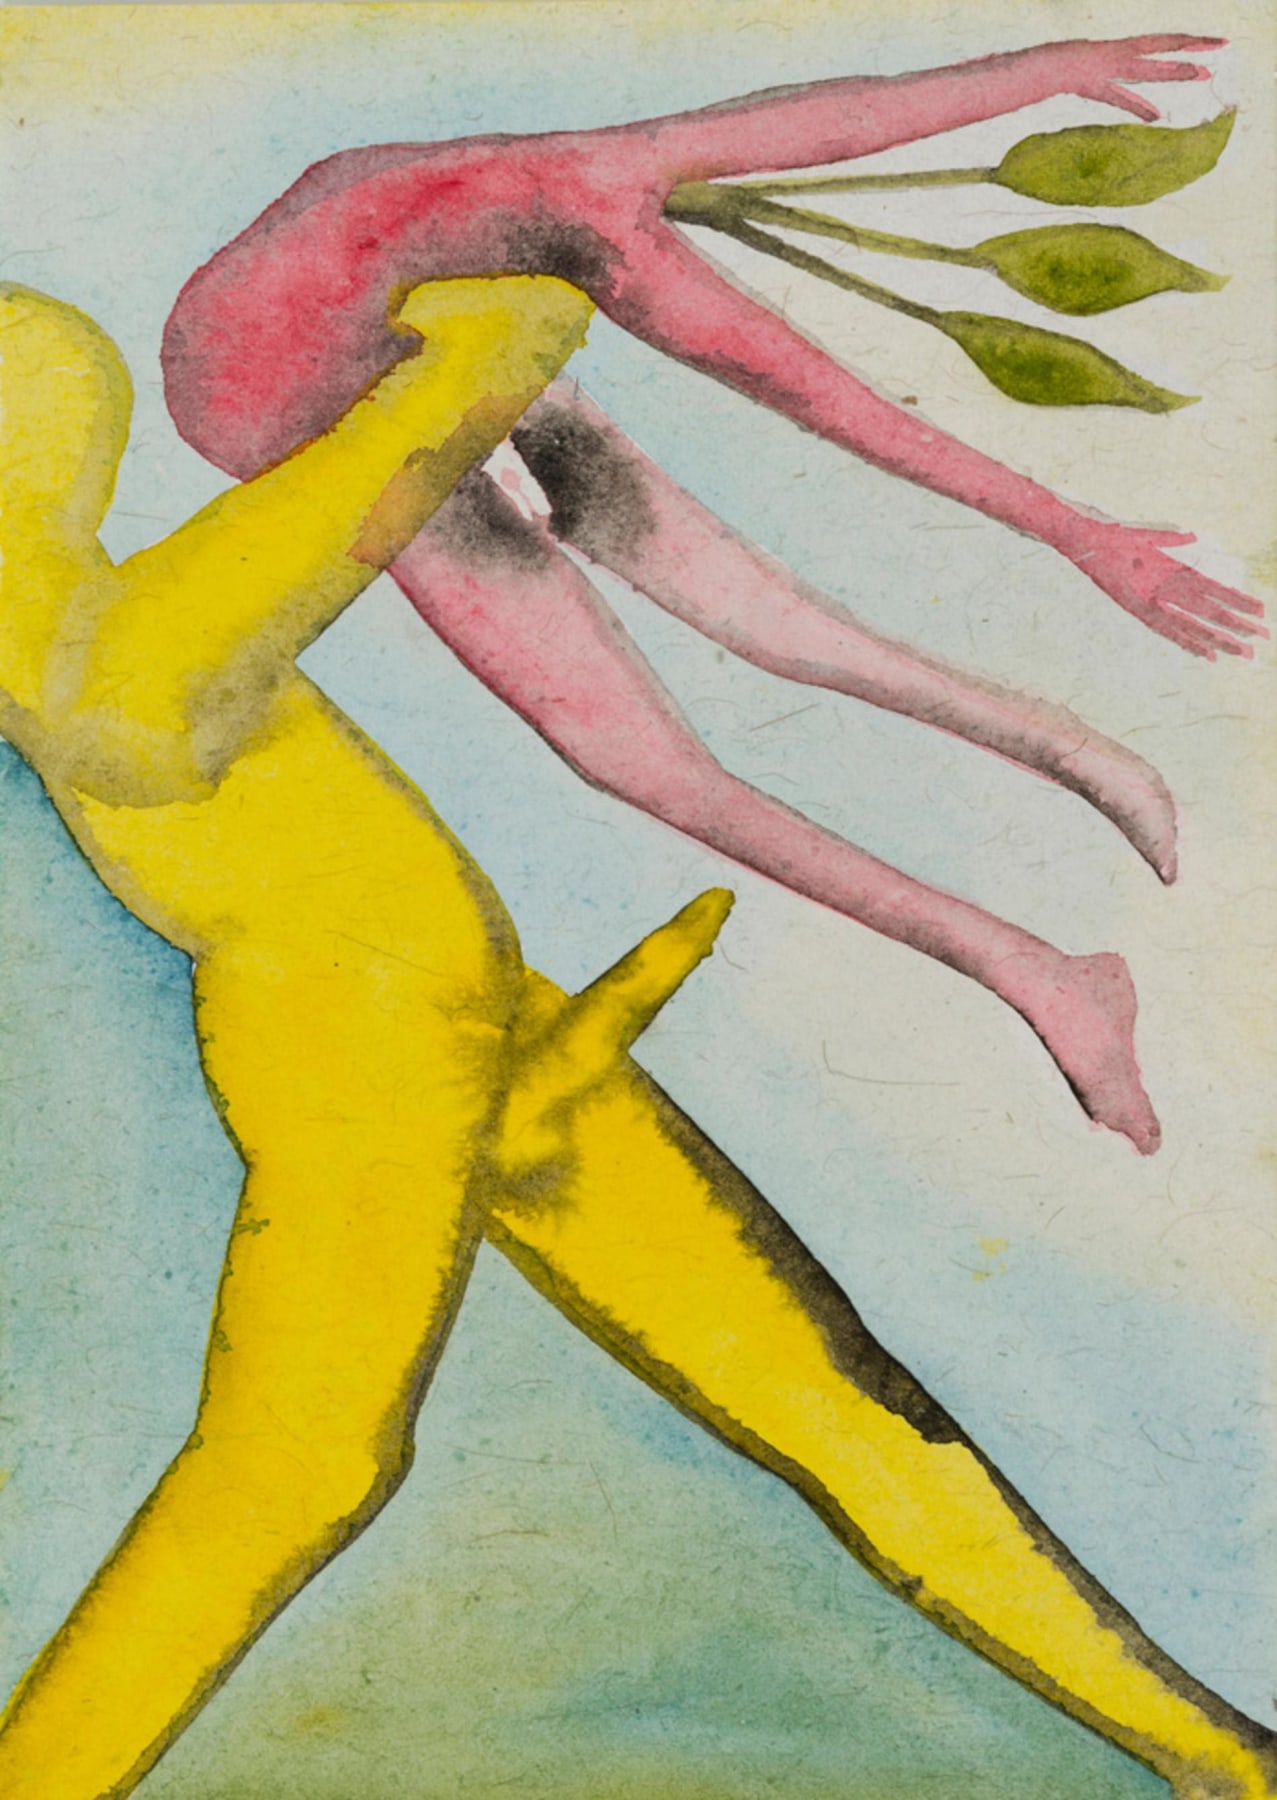 Image of  FRANCESCO CLEMENTE's A Story Well Told (11), 2013